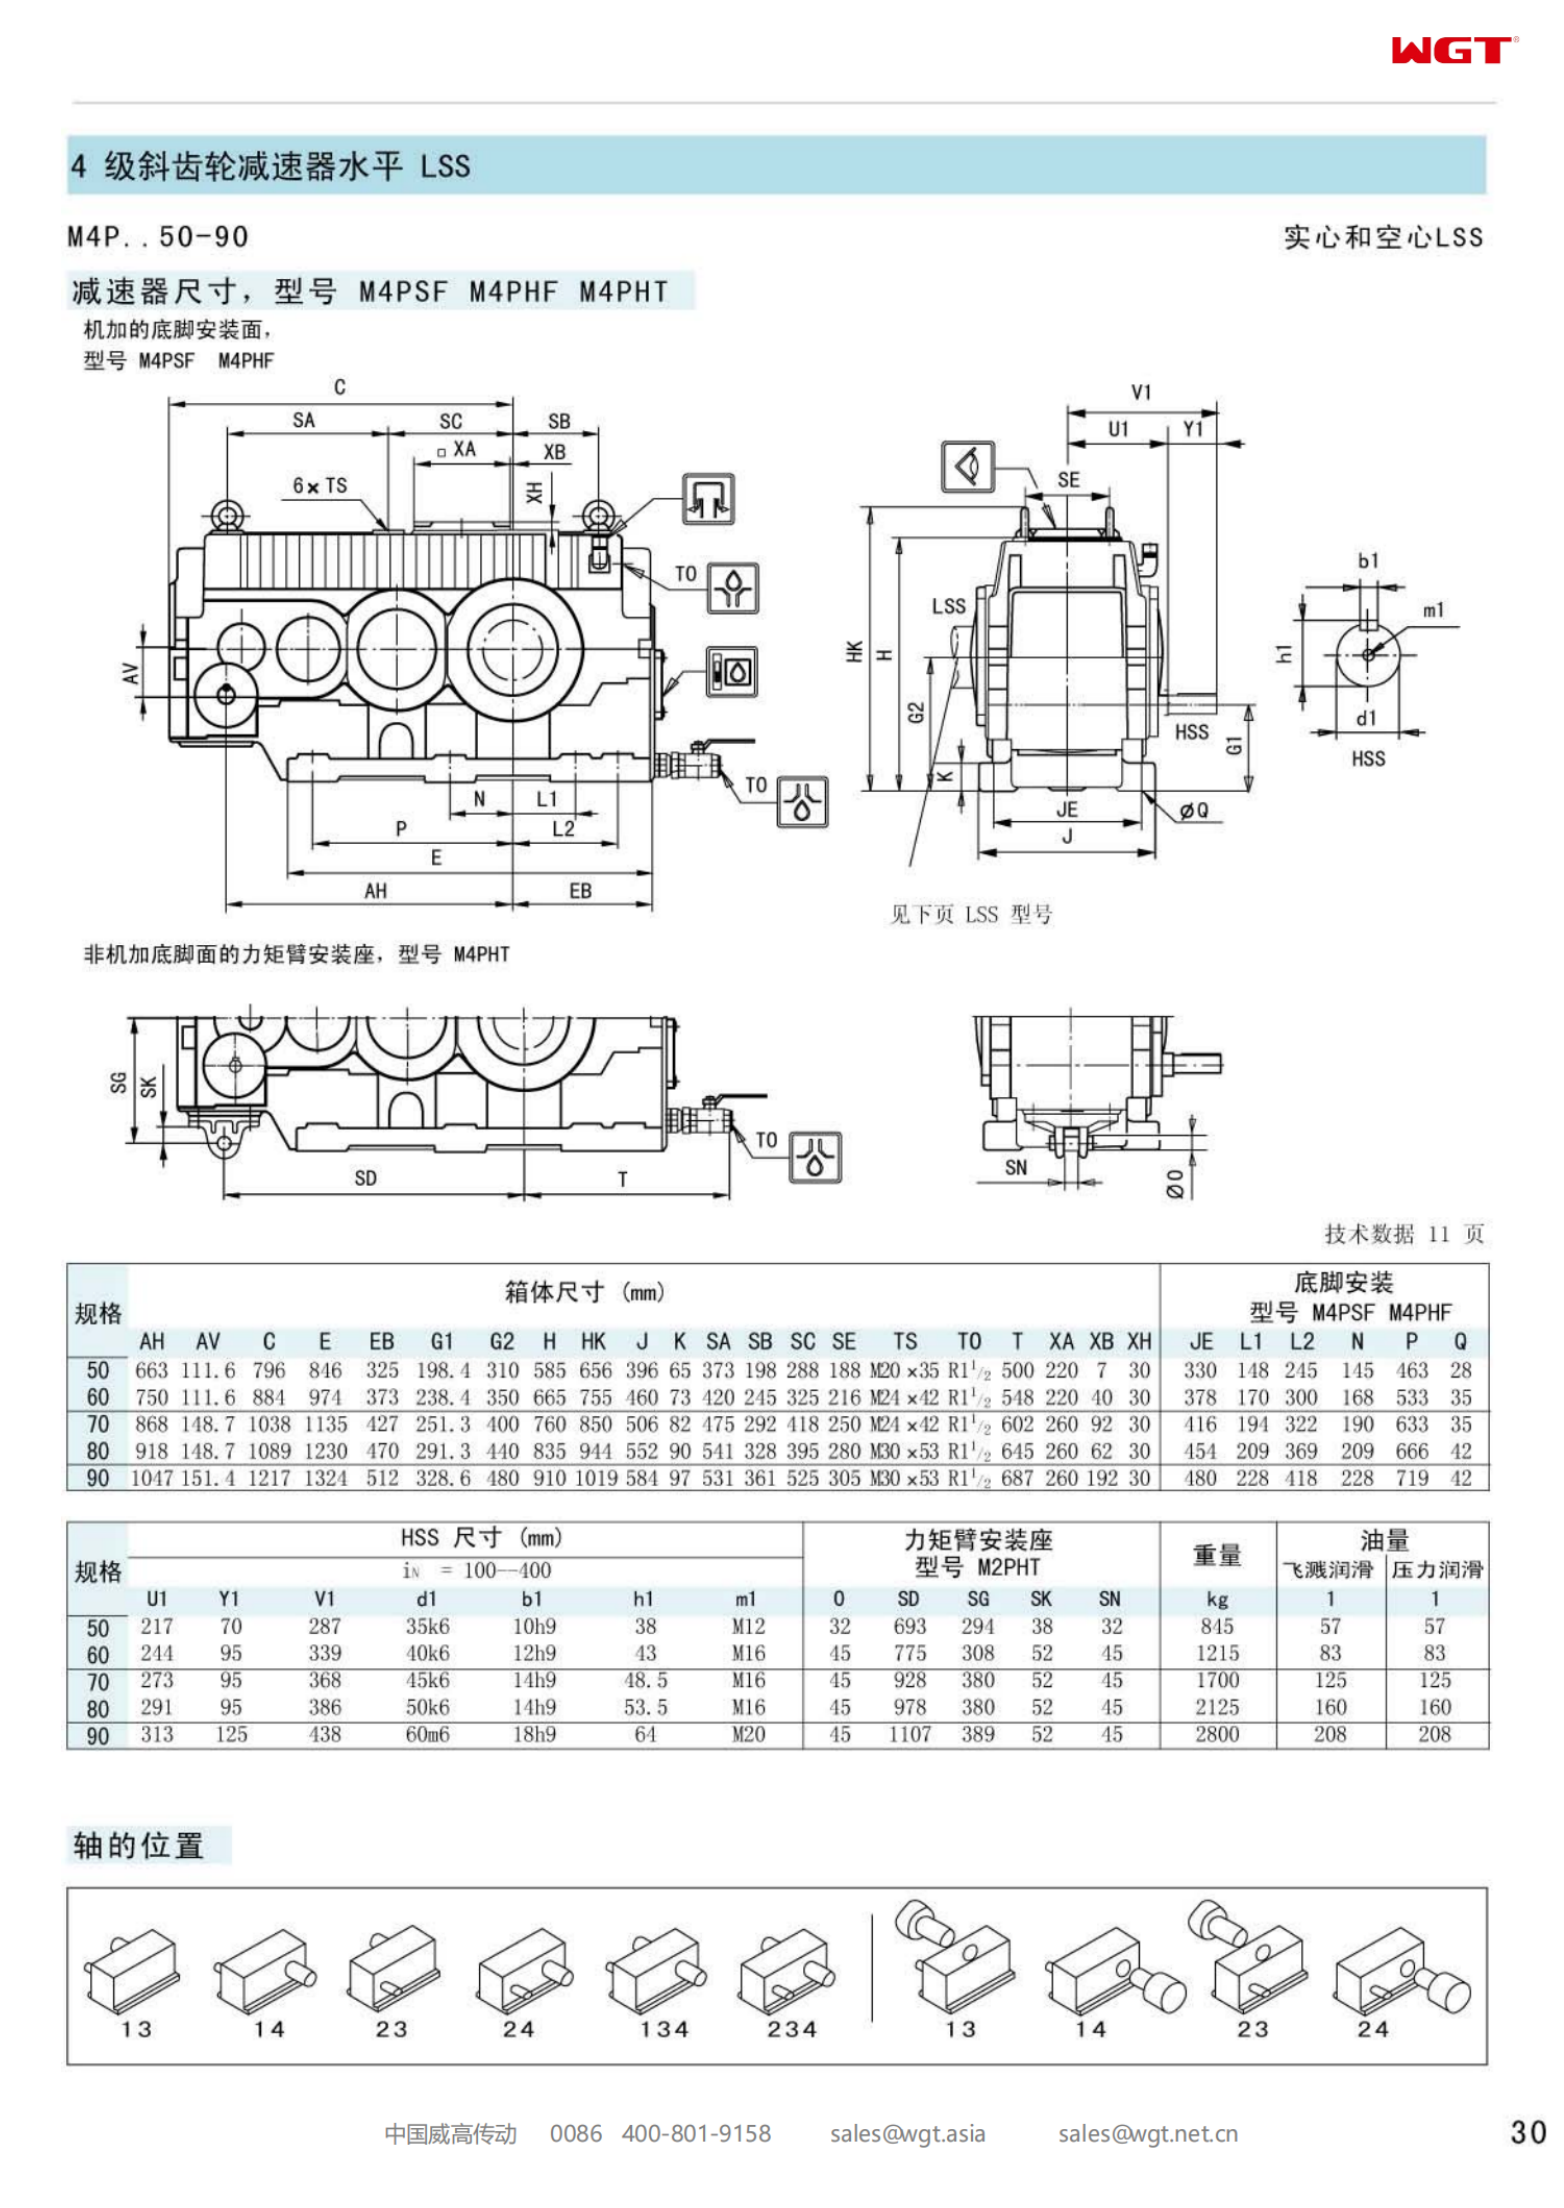 M4PSF70 Replace_SEW_M_Series Gearbox